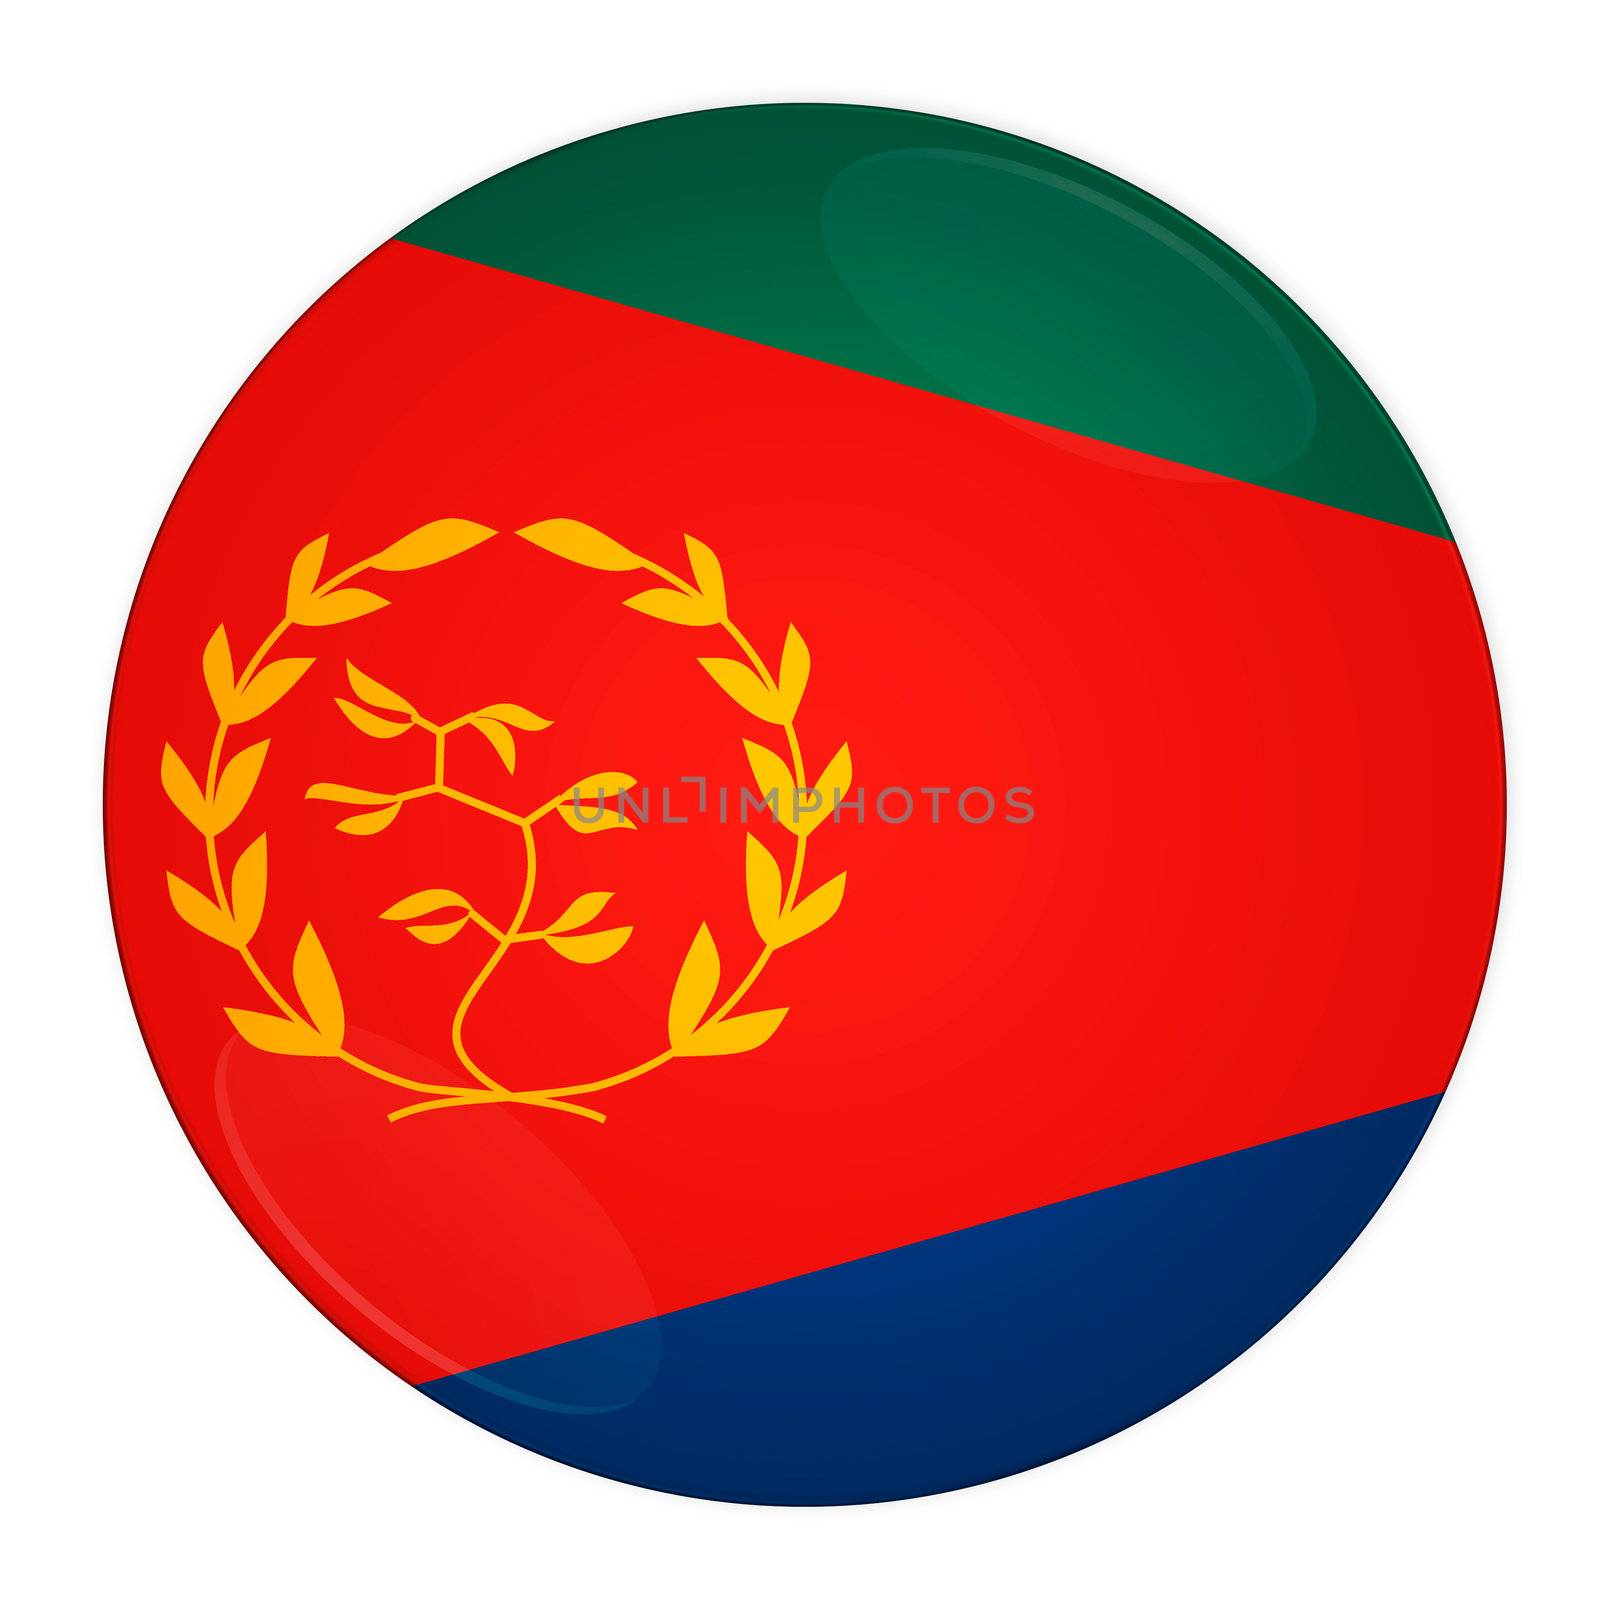 Eritrea button with flag by rusak